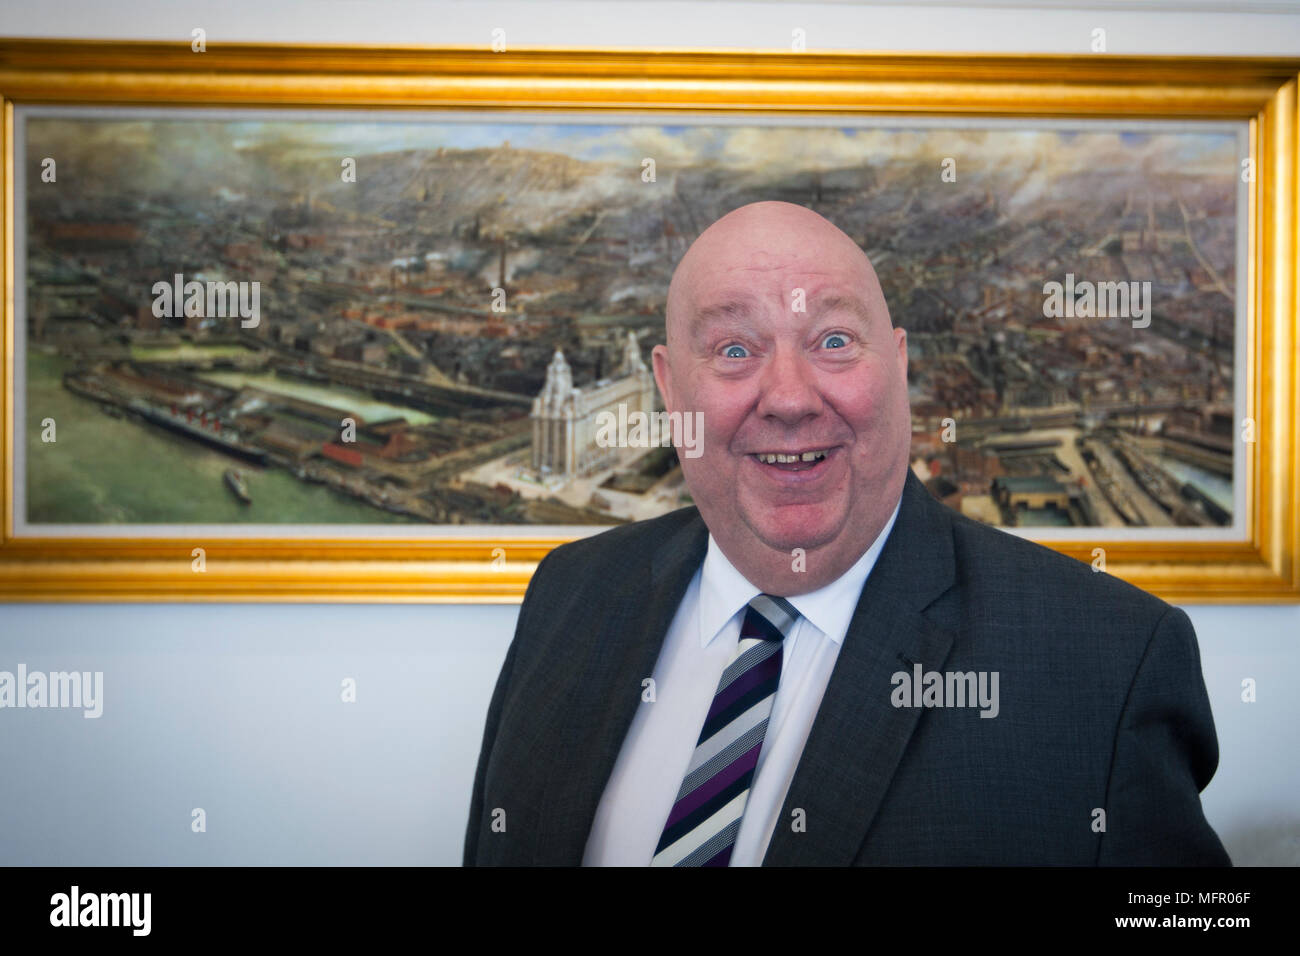 The Mayor of Liverpool, Cllr Joe Anderson, pictured in the mayor's Office within the Cunard Building in Liverpool. Stock Photo